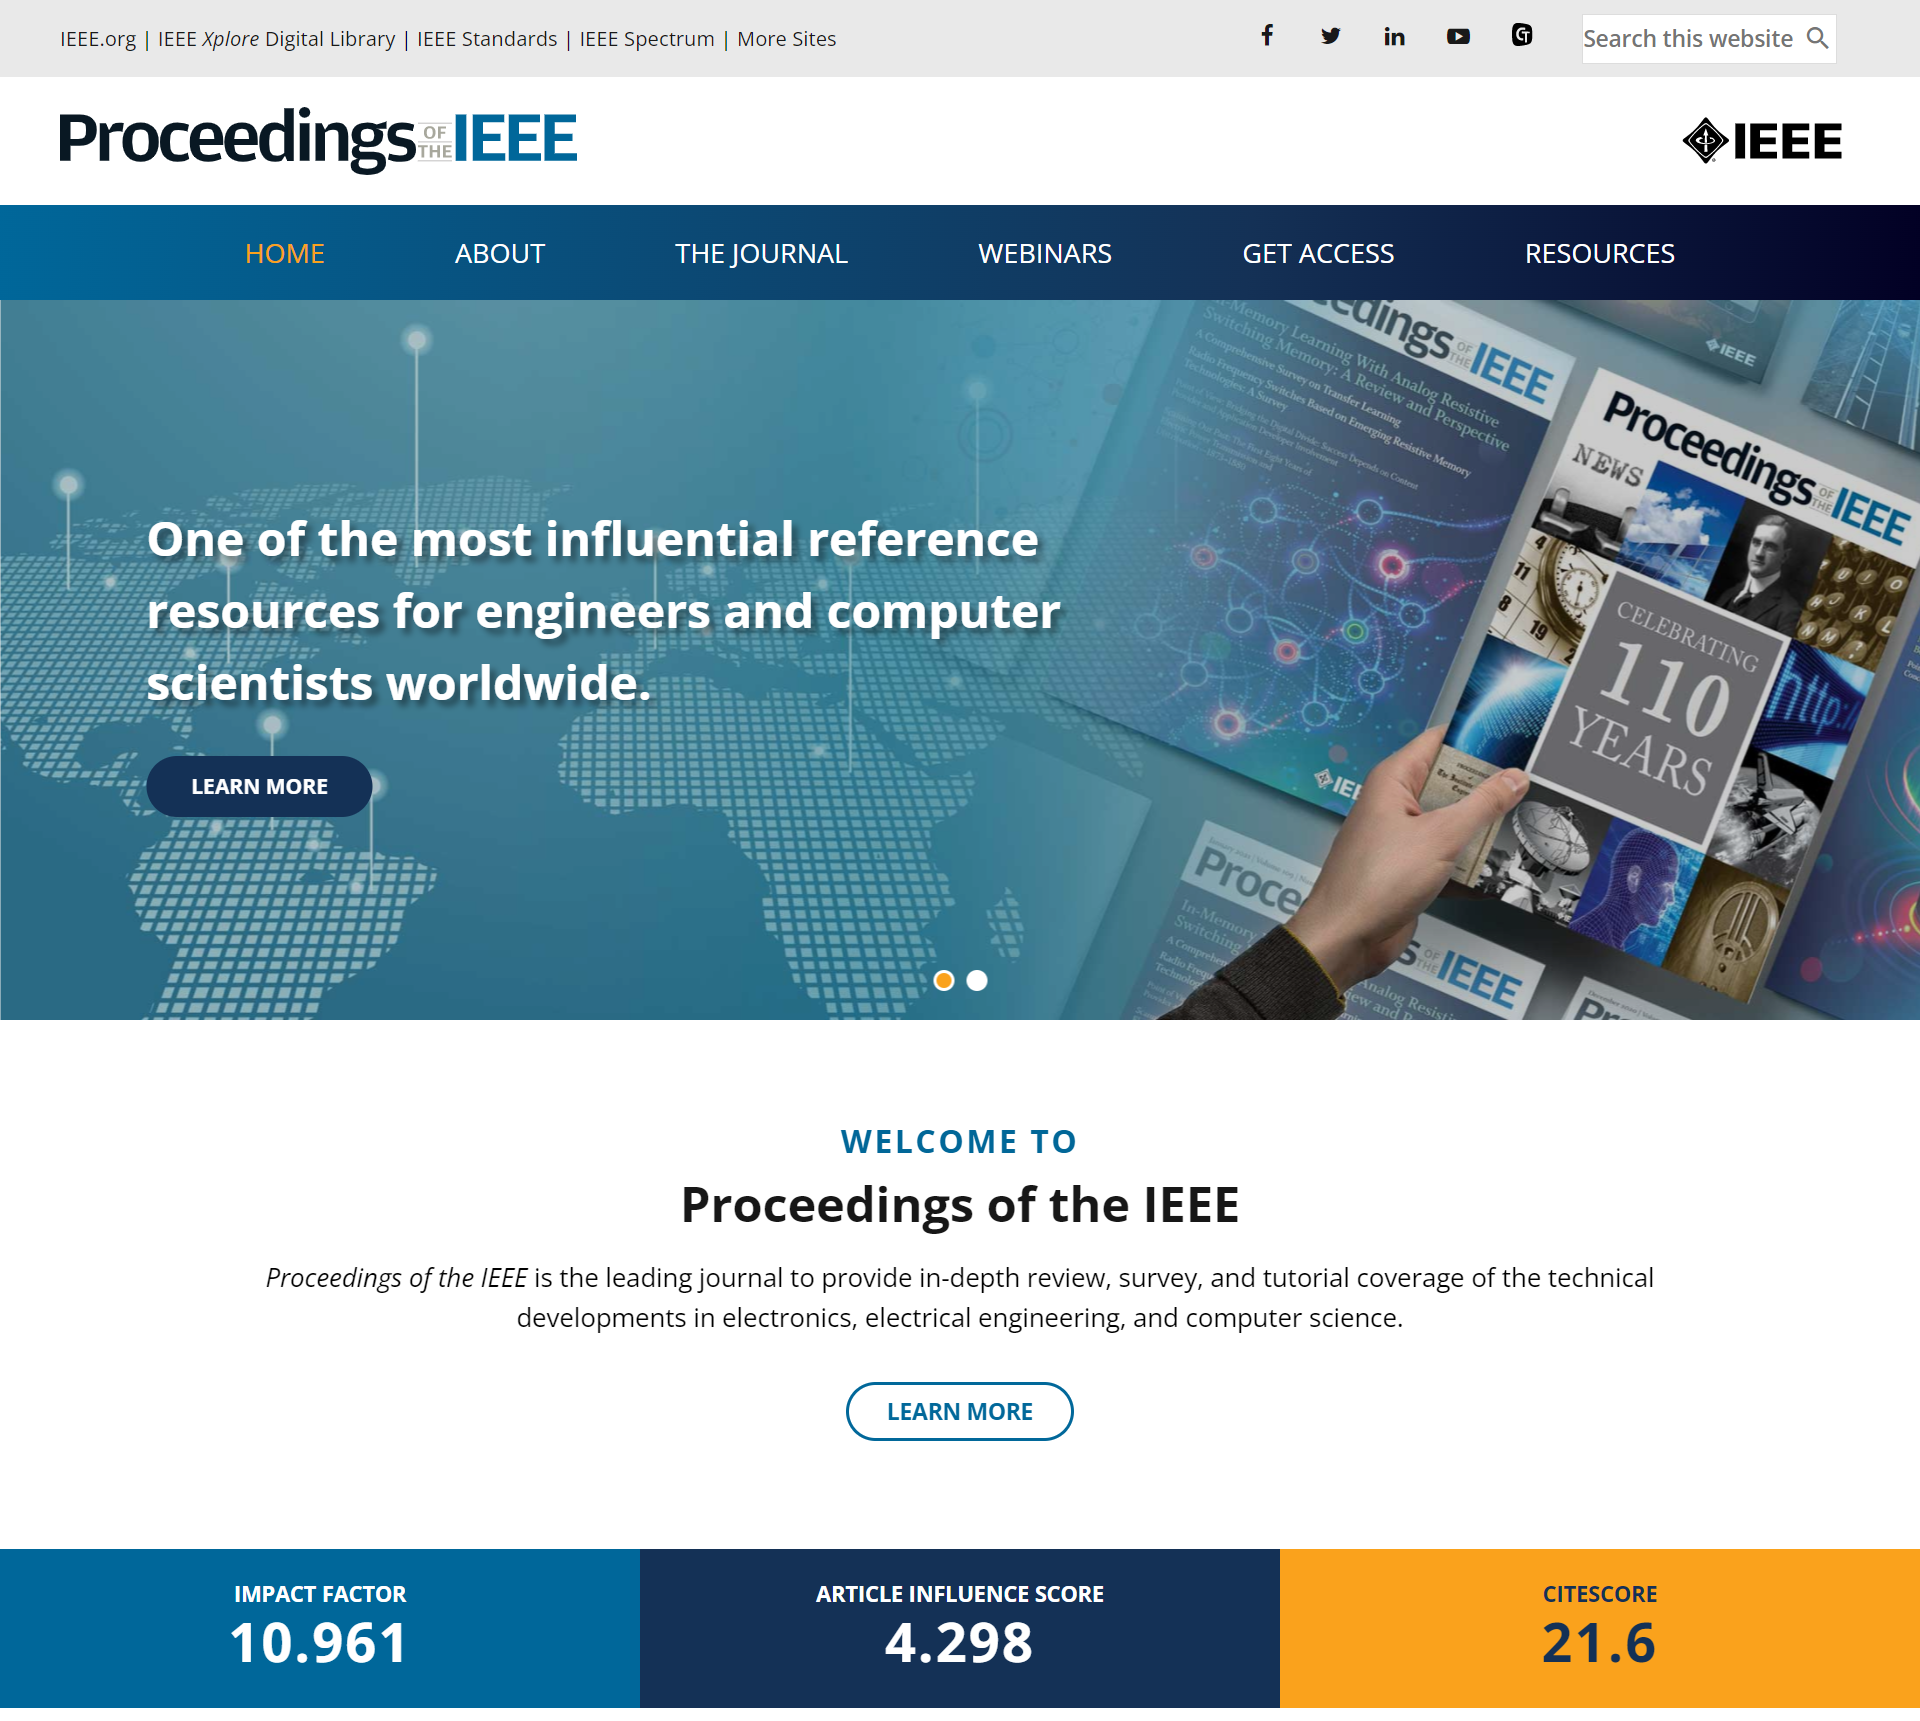 image showing part of the Proceedings of the IEEE home page